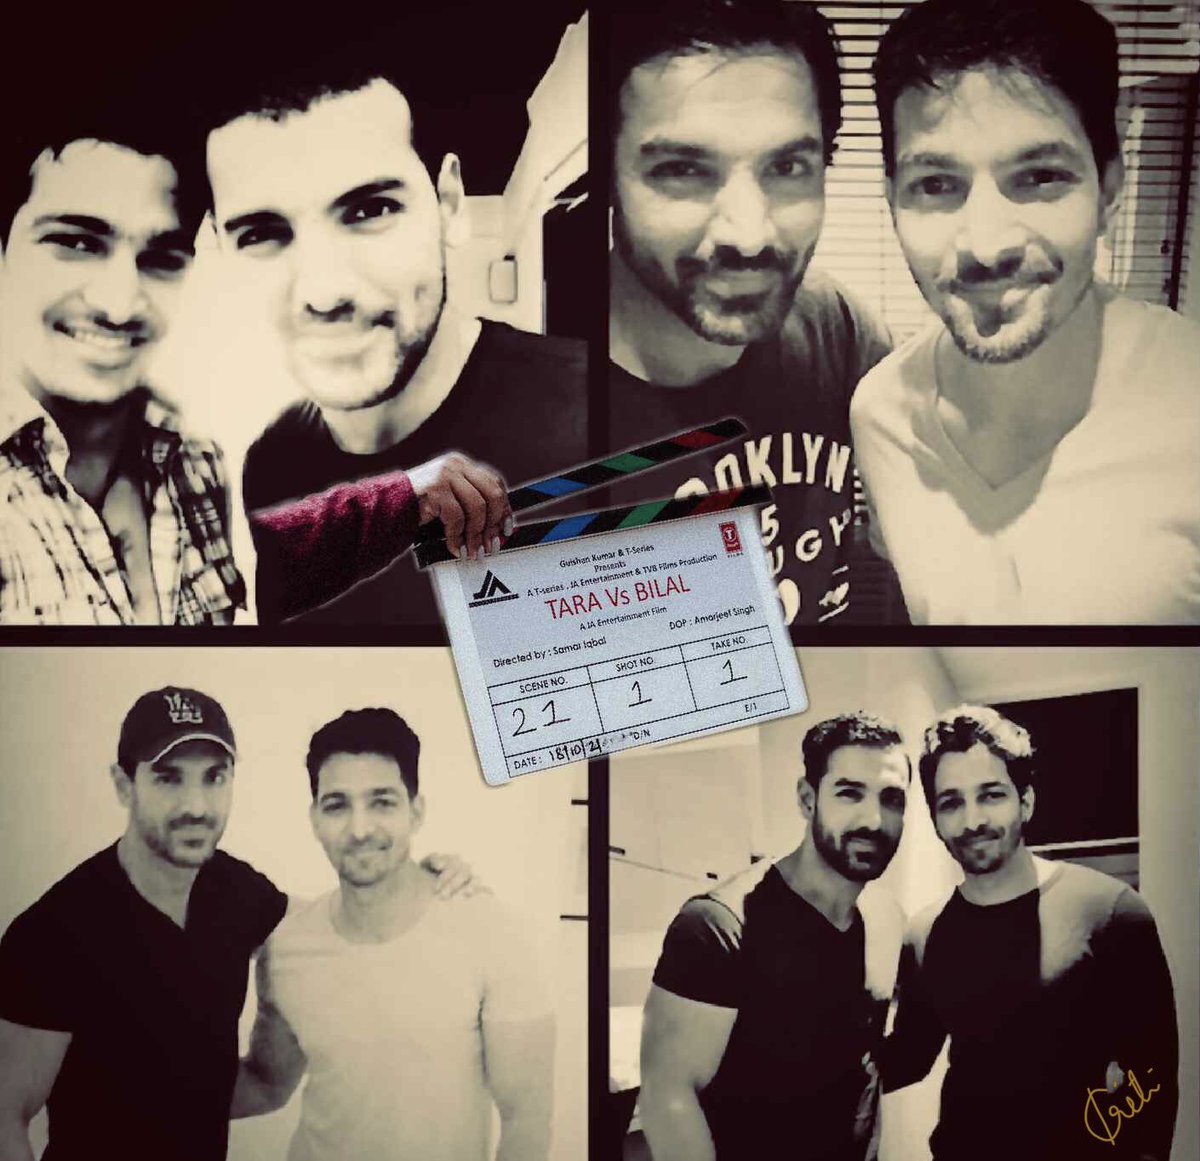 “Thankyou fr the faith John sir,from my 1st day in Mumbai to my 1st day on the set.I will do you proud”
@harsha_actor 

Heartiest Congrats fr #TaraVsBilal 
@johnabrahament @TheJohnAbraham @SanyukthaC @minnakshidas 

Wishing the best..Today n Always!
#handsomeguys #humble #honest